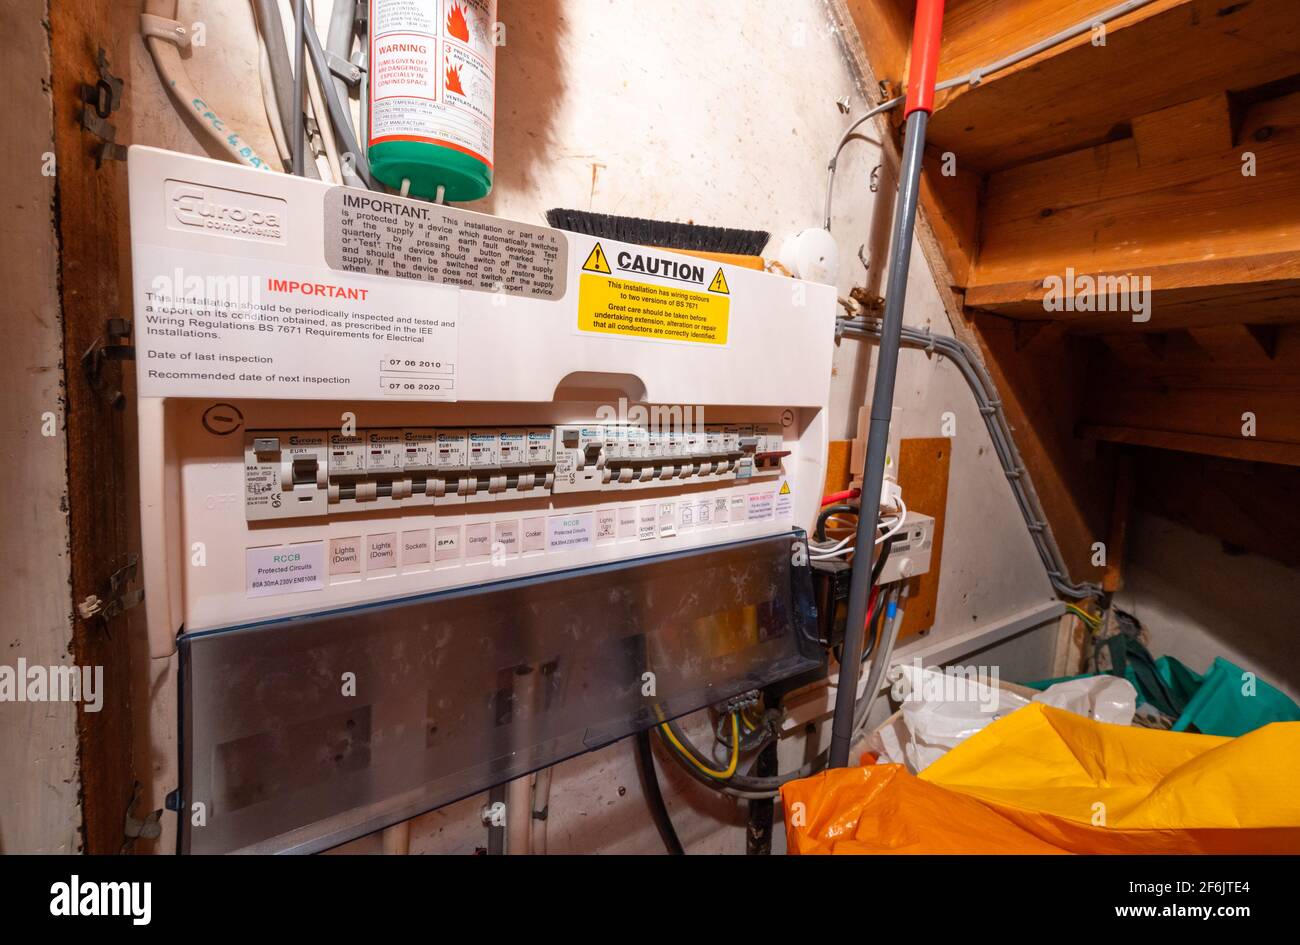 Household electrical circuit breaker box or fuse box for mains electricity safety protection, in a cupboard under stairs in a home in England, UK. Stock Photo